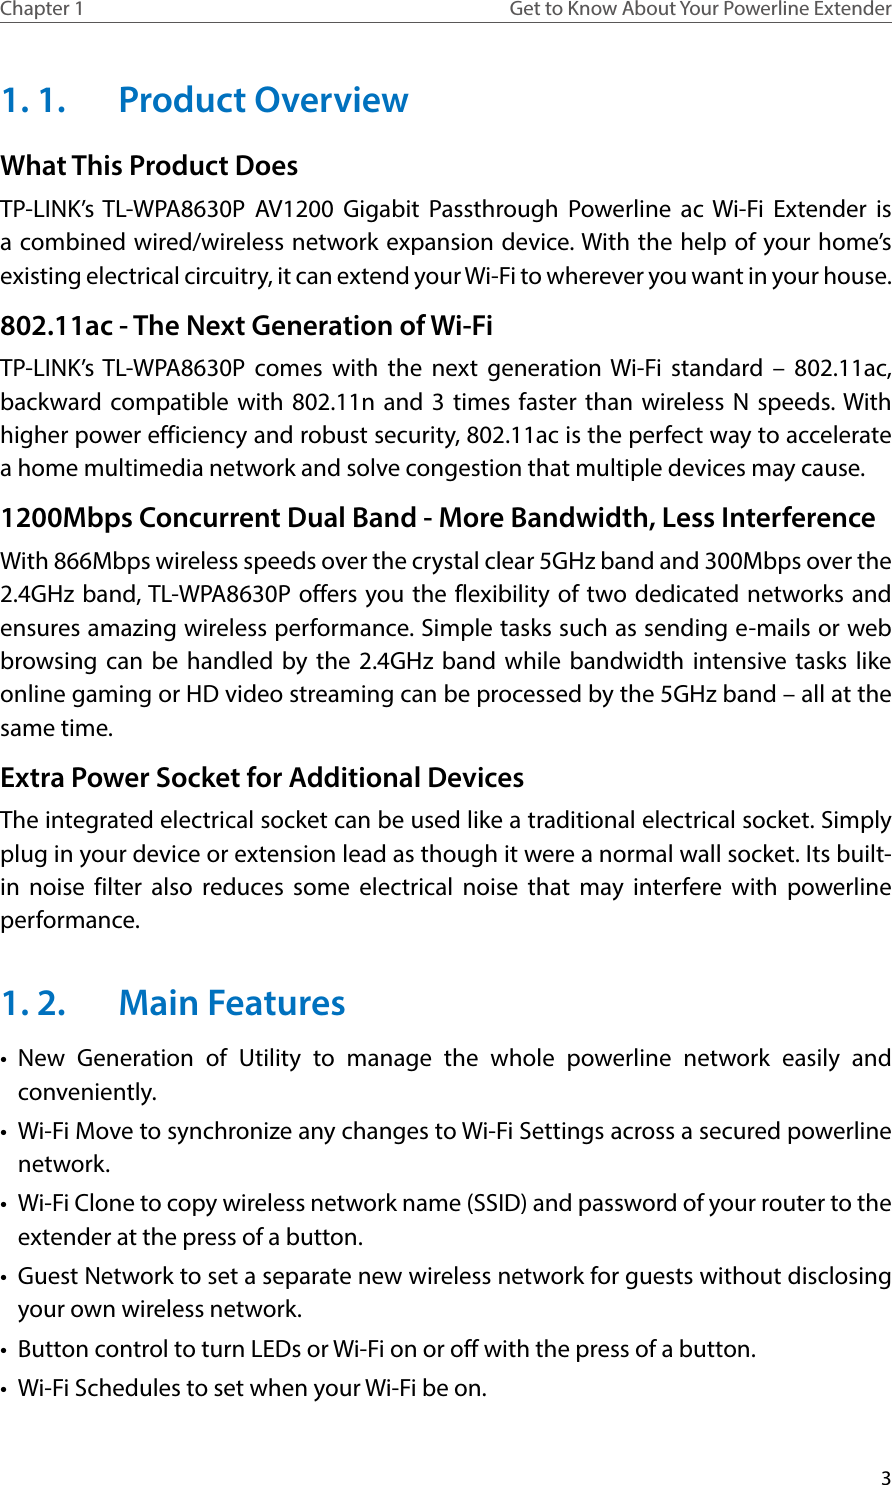 3Chapter 1 Get to Know About Your Powerline Extender1. 1.  Product OverviewWhat This Product DoesTP-LINK’s TL-WPA8630P AV1200 Gigabit Passthrough Powerline ac Wi-Fi Extender is a combined wired/wireless network expansion device. With the help of your home’s existing electrical circuitry, it can extend your Wi-Fi to wherever you want in your house. 802.11ac - The Next Generation of Wi-FiTP-LINK’s TL-WPA8630P comes with the next generation Wi-Fi standard – 802.11ac, backward compatible with 802.11n and 3 times faster than wireless N speeds. With higher power efficiency and robust security, 802.11ac is the perfect way to accelerate a home multimedia network and solve congestion that multiple devices may cause.1200Mbps Concurrent Dual Band - More Bandwidth, Less InterferenceWith 866Mbps wireless speeds over the crystal clear 5GHz band and 300Mbps over the 2.4GHz band, TL-WPA8630P offers you the flexibility of two dedicated networks and ensures amazing wireless performance. Simple tasks such as sending e-mails or web browsing can be handled by the 2.4GHz band while bandwidth intensive tasks like online gaming or HD video streaming can be processed by the 5GHz band – all at the same time.Extra Power Socket for Additional DevicesThe integrated electrical socket can be used like a traditional electrical socket. Simply plug in your device or extension lead as though it were a normal wall socket. Its built-in noise filter also reduces some electrical noise that may interfere with powerline performance.1. 2.  Main Features•  New Generation of Utility to manage the whole powerline network easily and conveniently.•  Wi-Fi Move to synchronize any changes to Wi-Fi Settings across a secured powerline network.•  Wi-Fi Clone to copy wireless network name (SSID) and password of your router to the extender at the press of a button.•  Guest Network to set a separate new wireless network for guests without disclosing your own wireless network.•  Button control to turn LEDs or Wi-Fi on or off with the press of a button.•  Wi-Fi Schedules to set when your Wi-Fi be on.